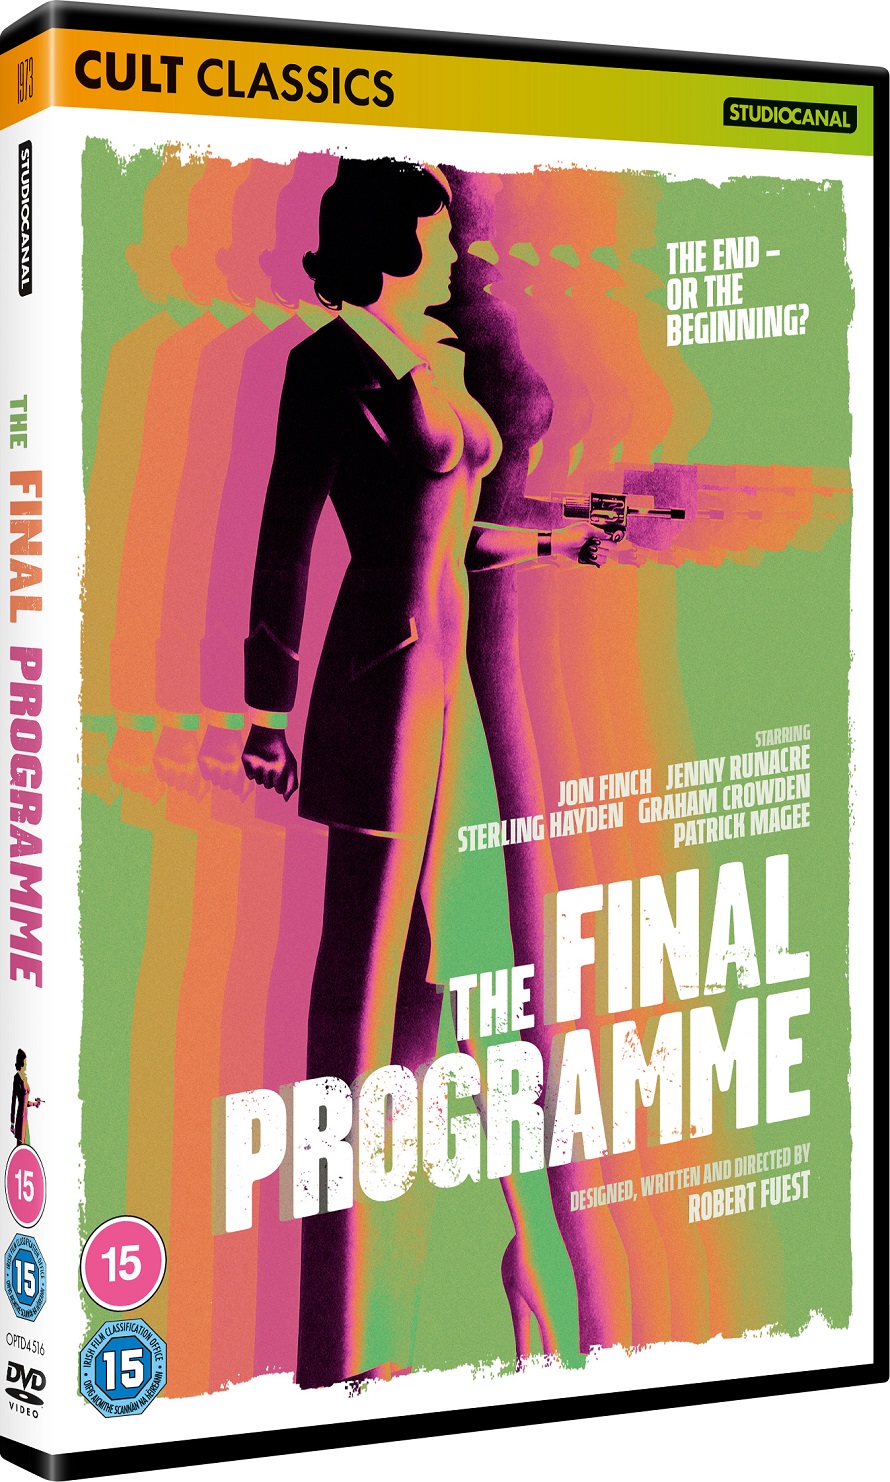 The Final Programme cover